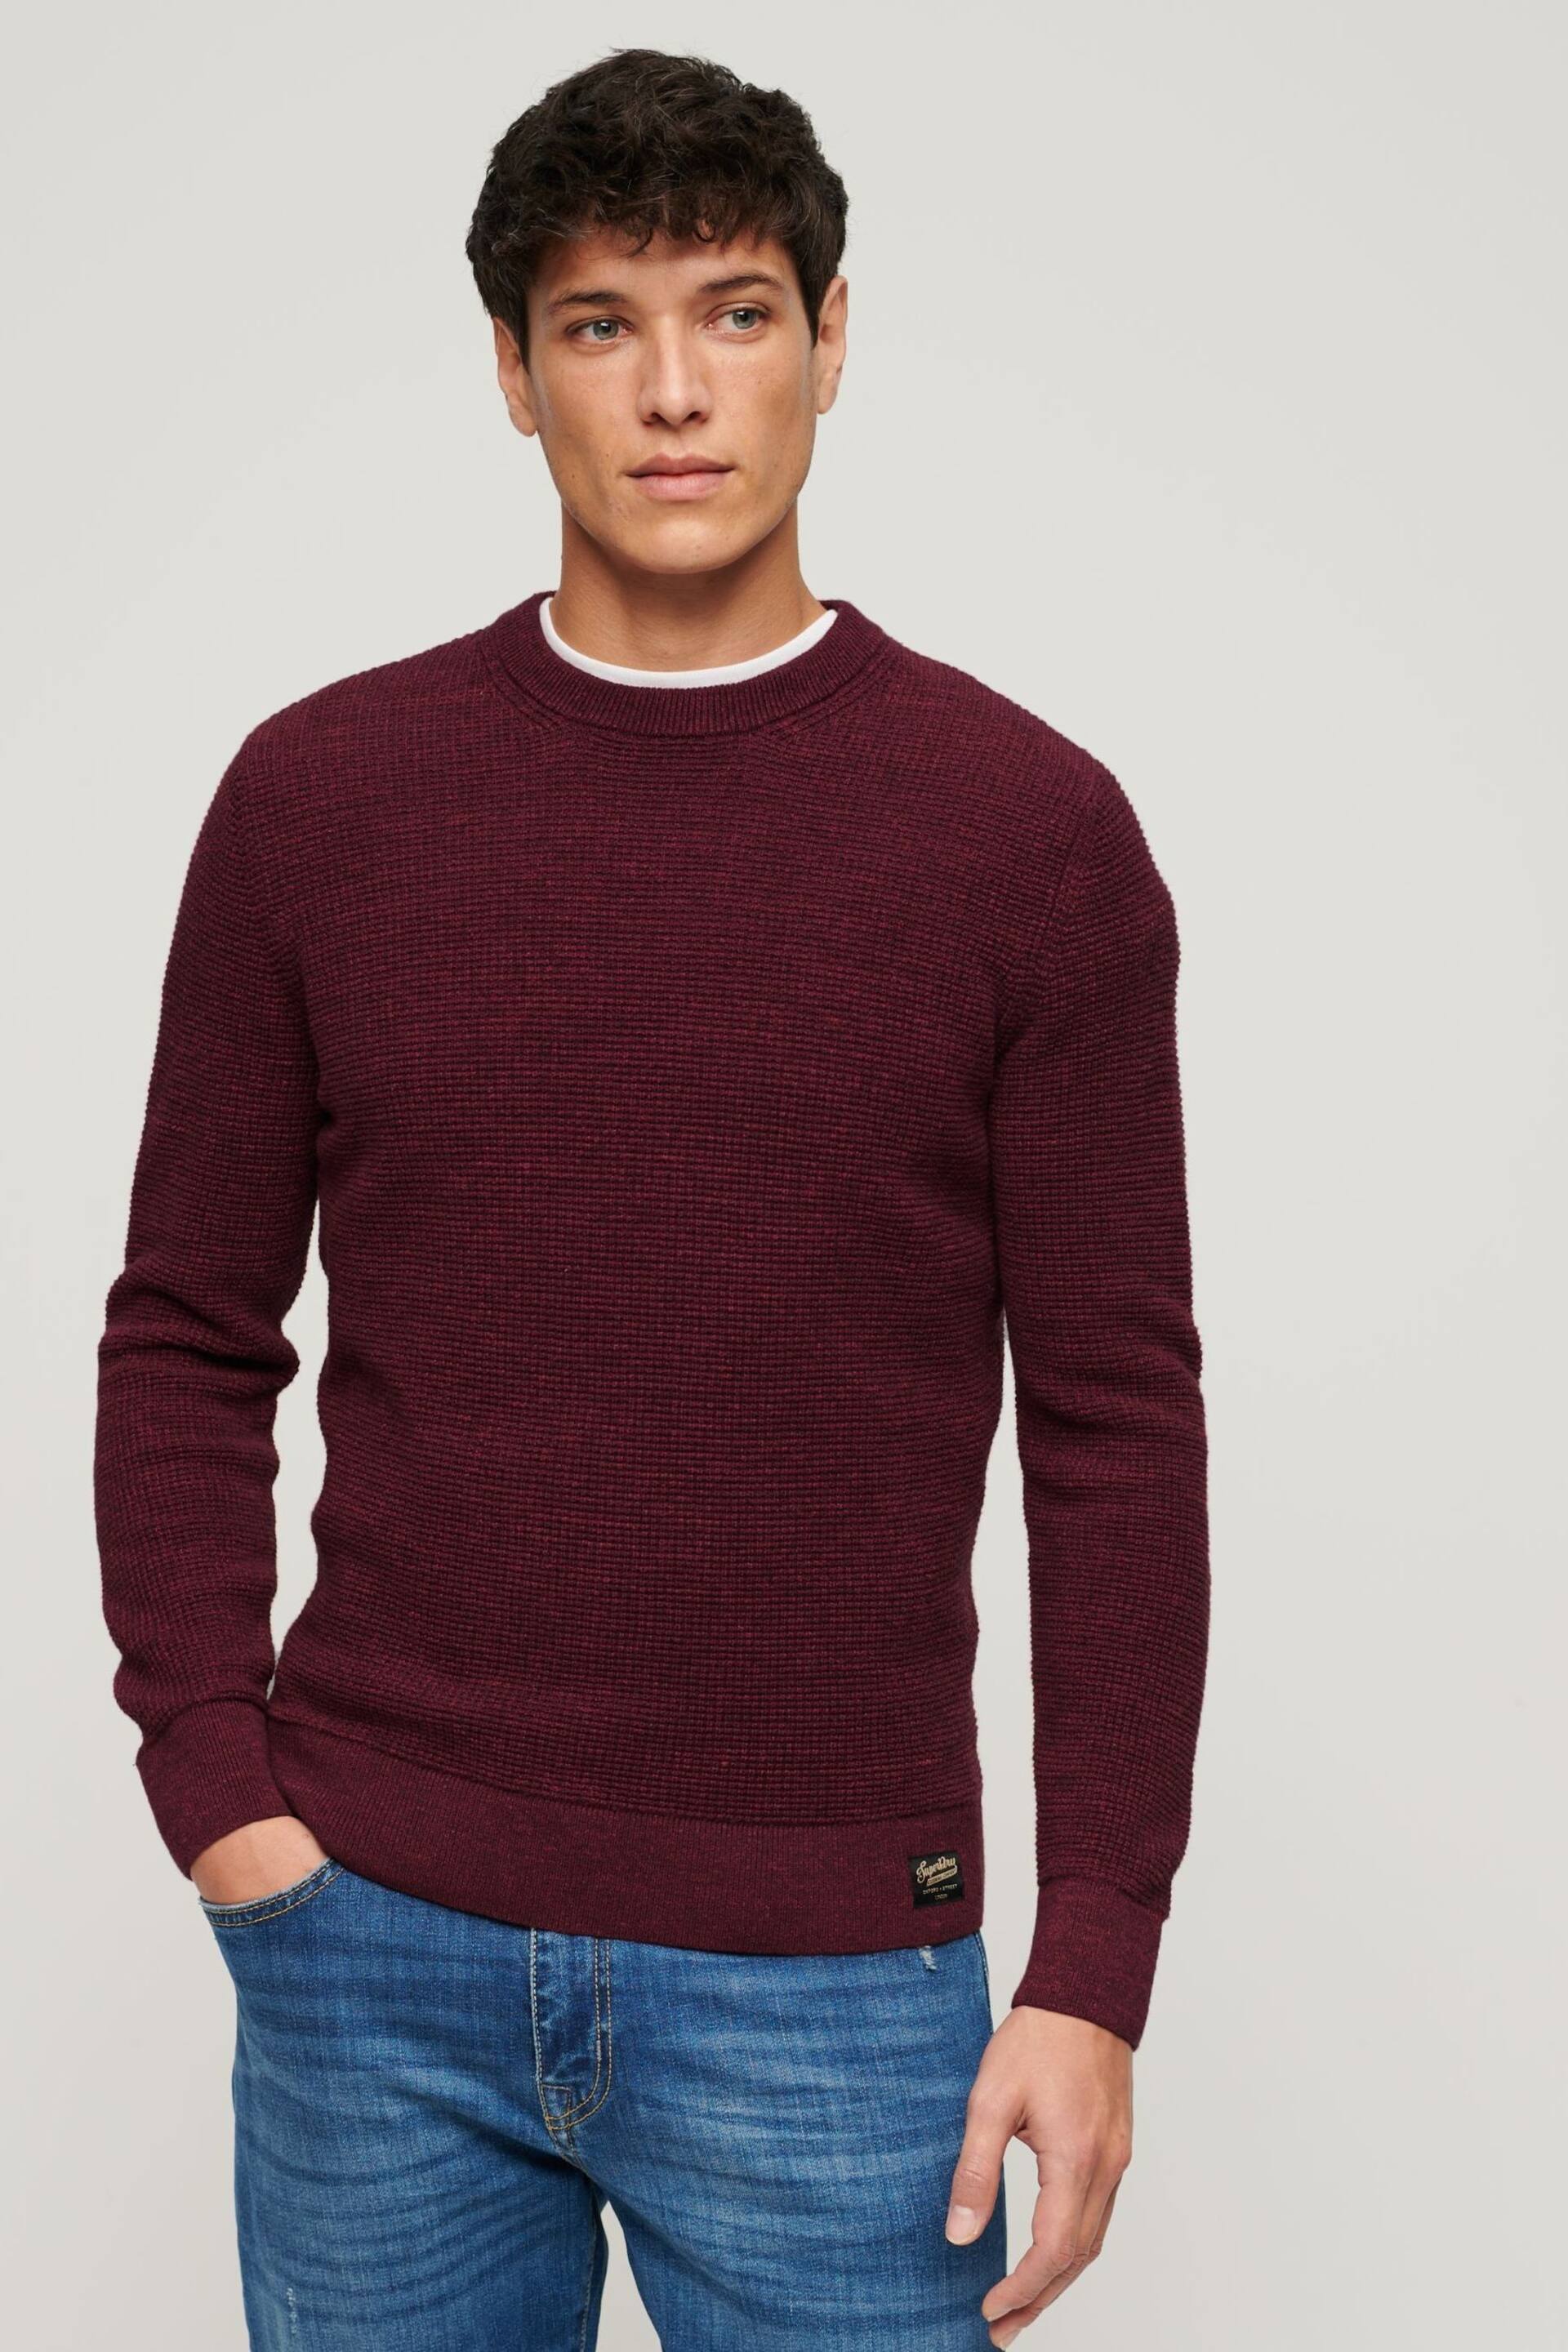 Superdry Red Textured Crew Knit Jumper - Image 1 of 3